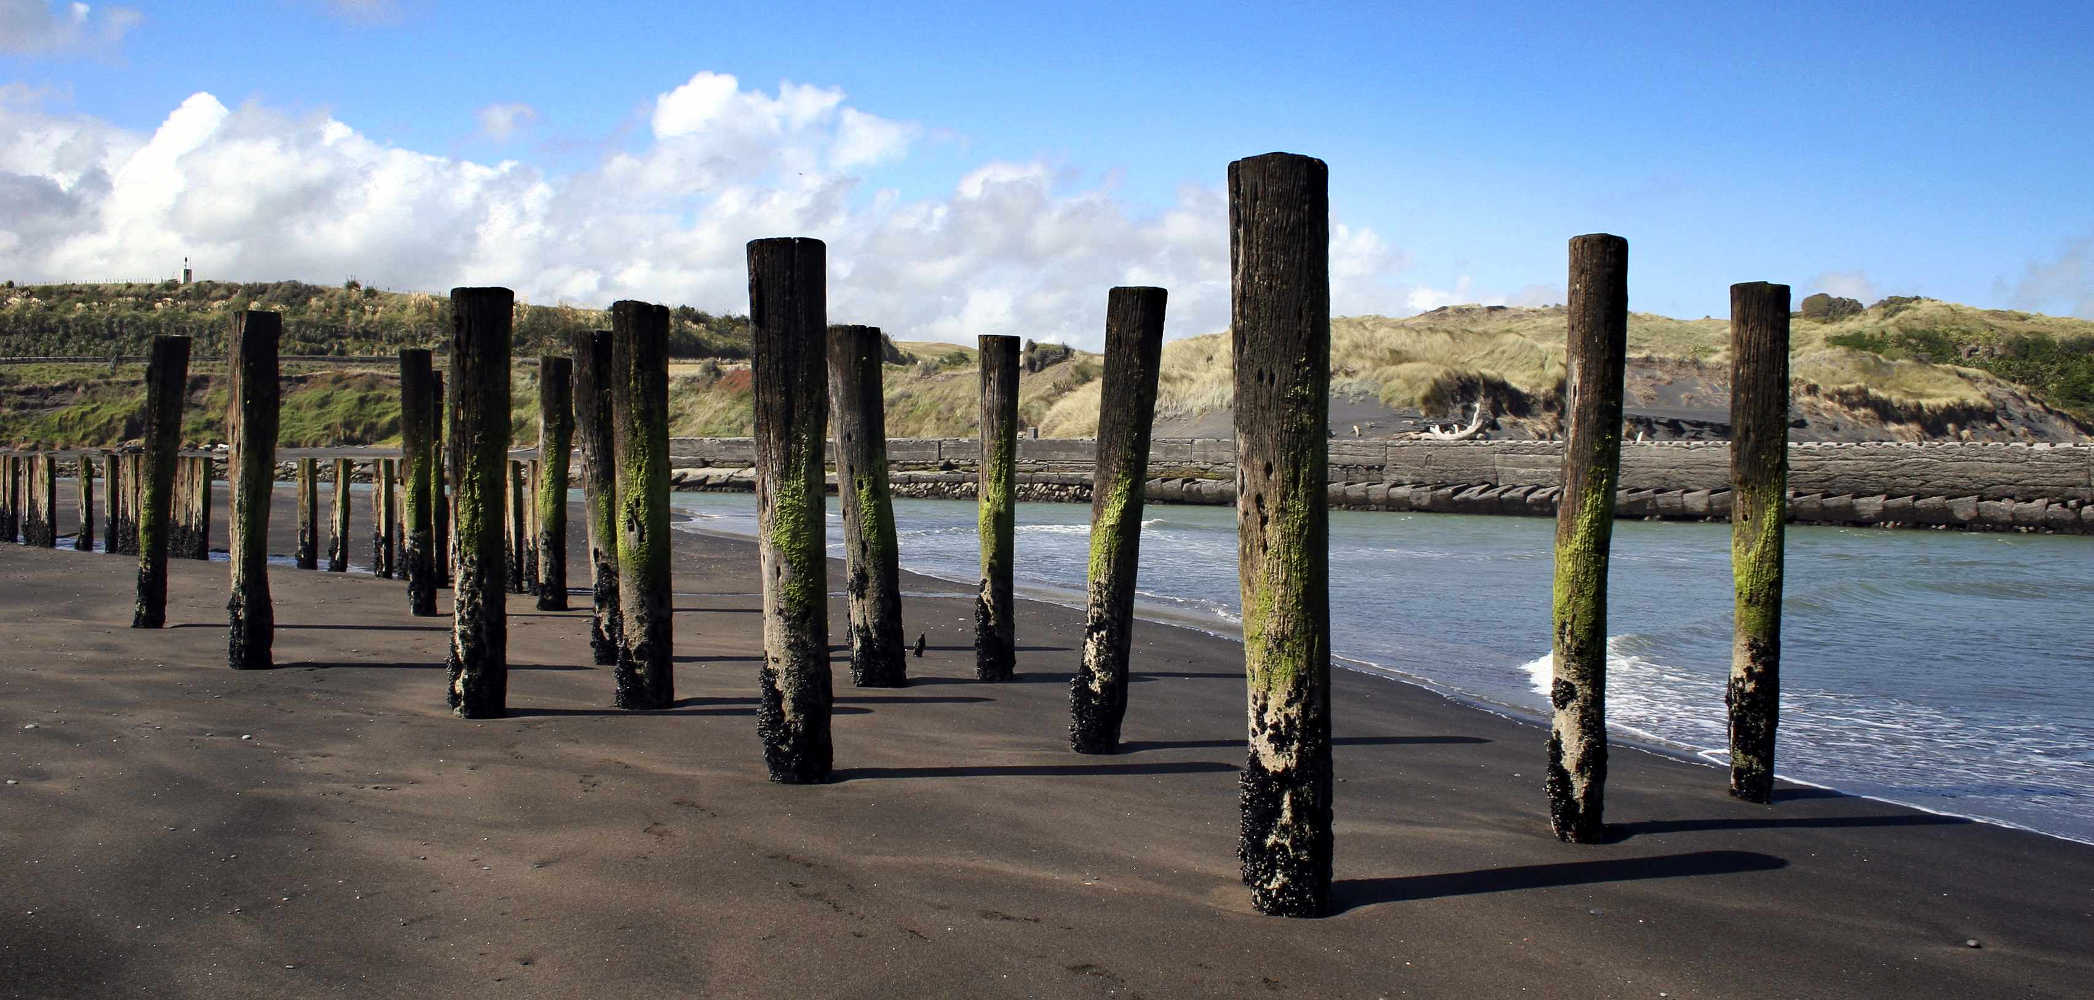 Wooden poles stand out of the sand at Patea, Taranaki